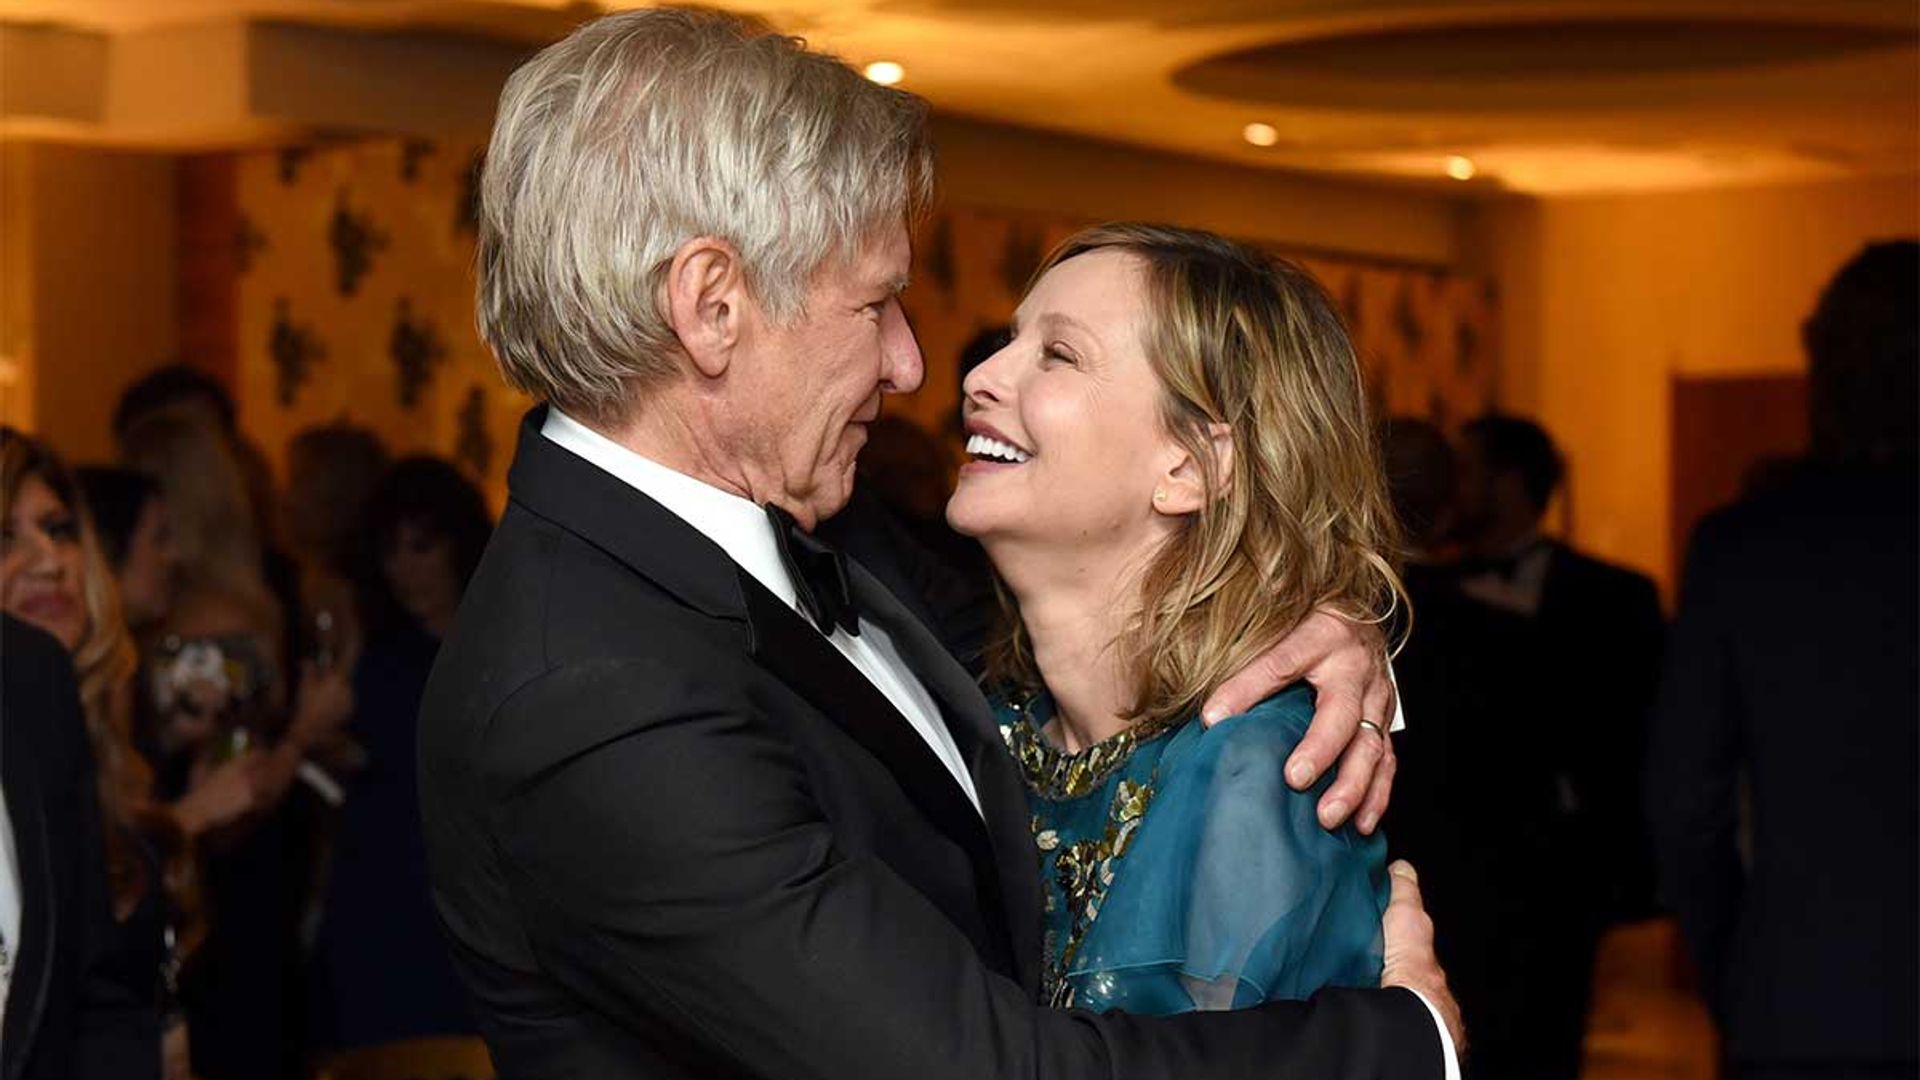 Star Wars actor Harrison Ford reveals unusual secret to happy marriage